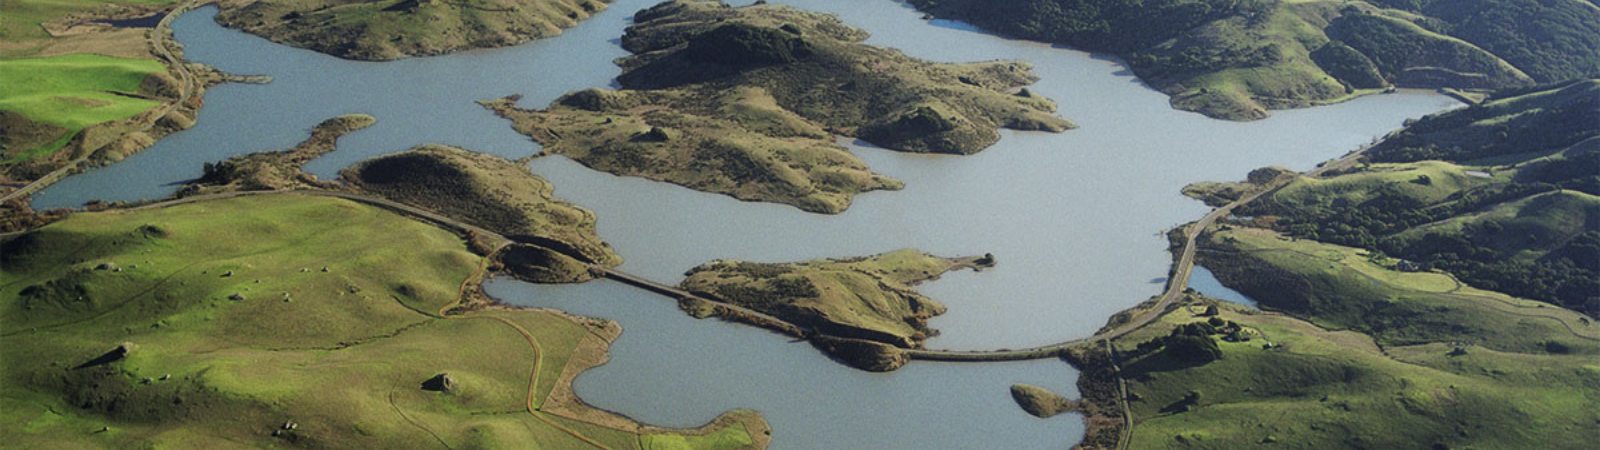 Aerial image shows a lake surrounded by green hills. 